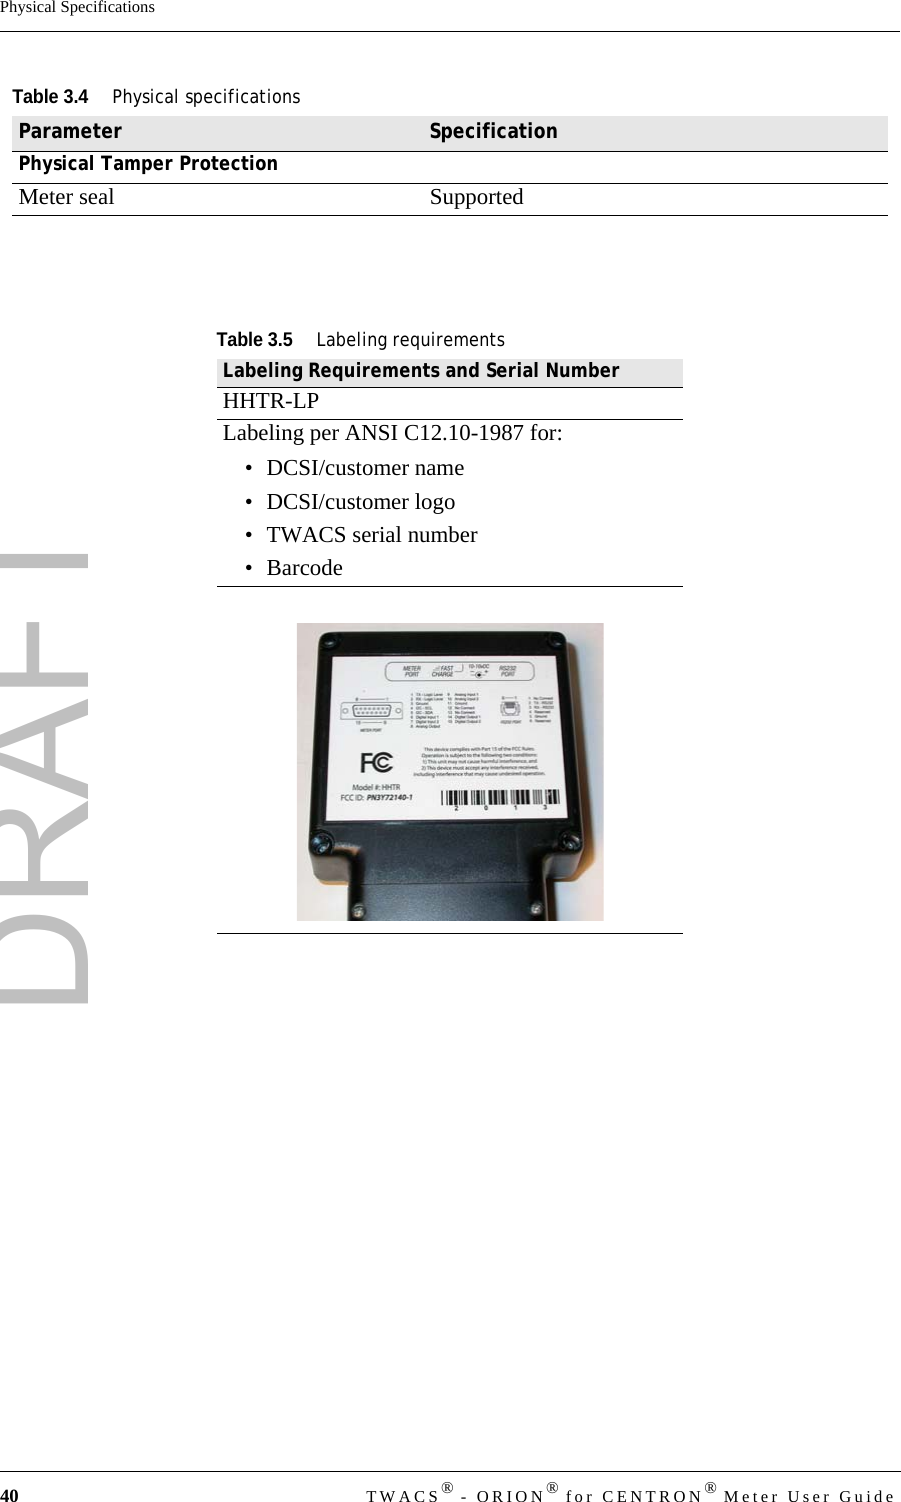 DRAFT40 TWACS® - ORION® for CENTRON® Meter User GuidePhysical SpecificationsPhysical Tamper ProtectionMeter seal SupportedTable 3.5Labeling requirementsLabeling Requirements and Serial NumberHHTR-LPLabeling per ANSI C12.10-1987 for:• DCSI/customer name• DCSI/customer logo • TWACS serial number•BarcodeTable 3.4Physical specificationsParameter Specification